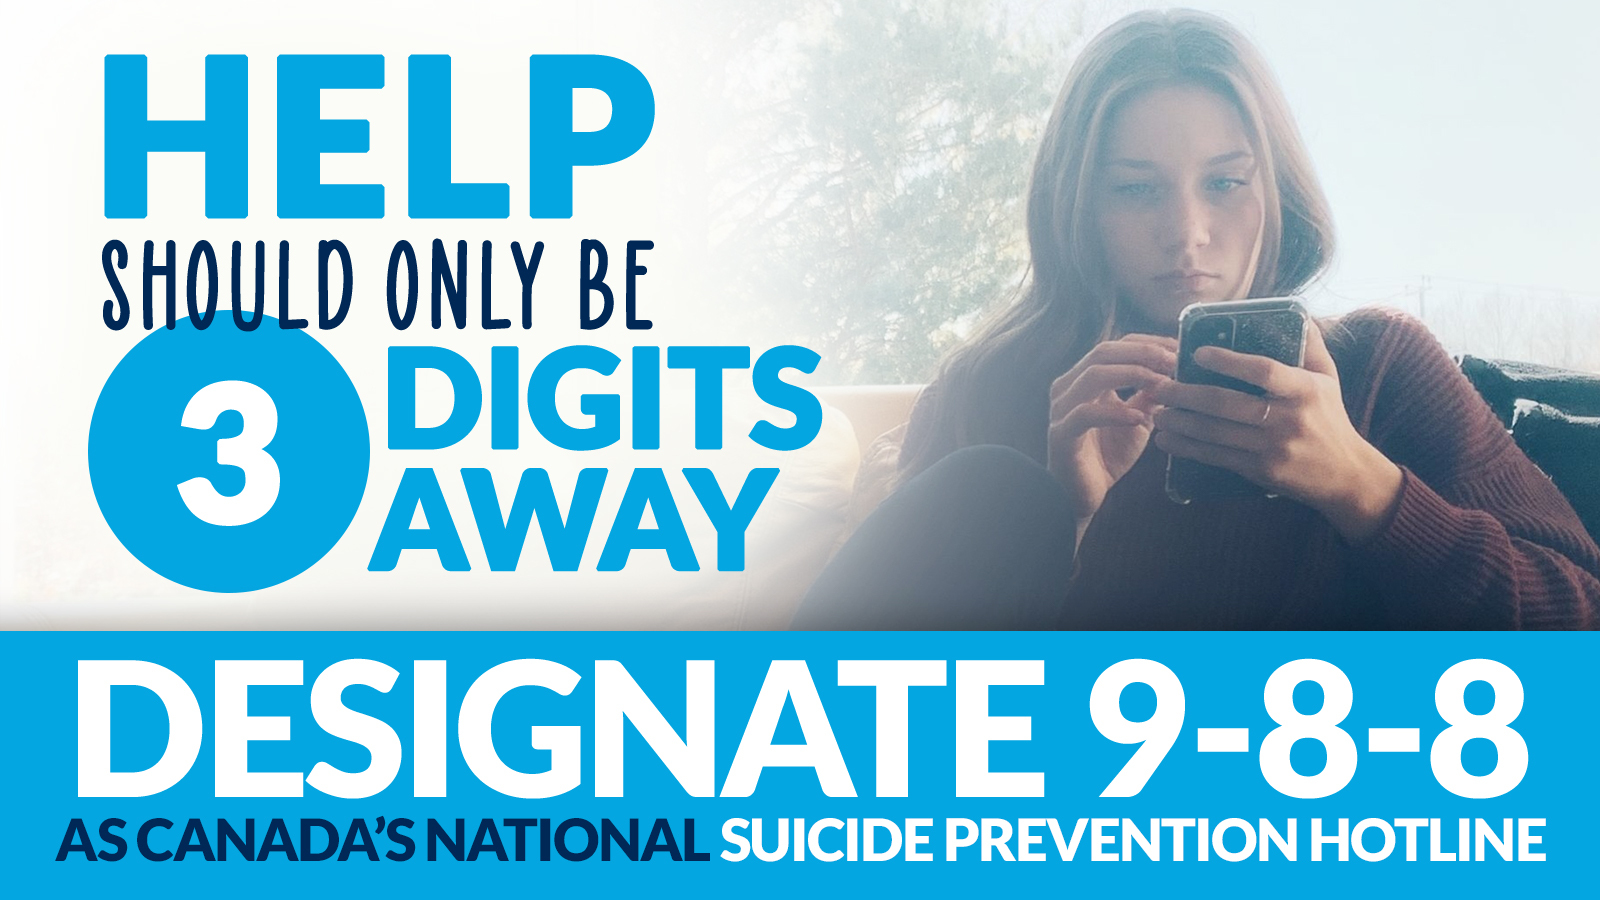 DEDICATED 9-8-8 NATIONAL SUICIDE HOTLINE TO BE IMPLEMENTED FOR CANADIANS IN CRISES